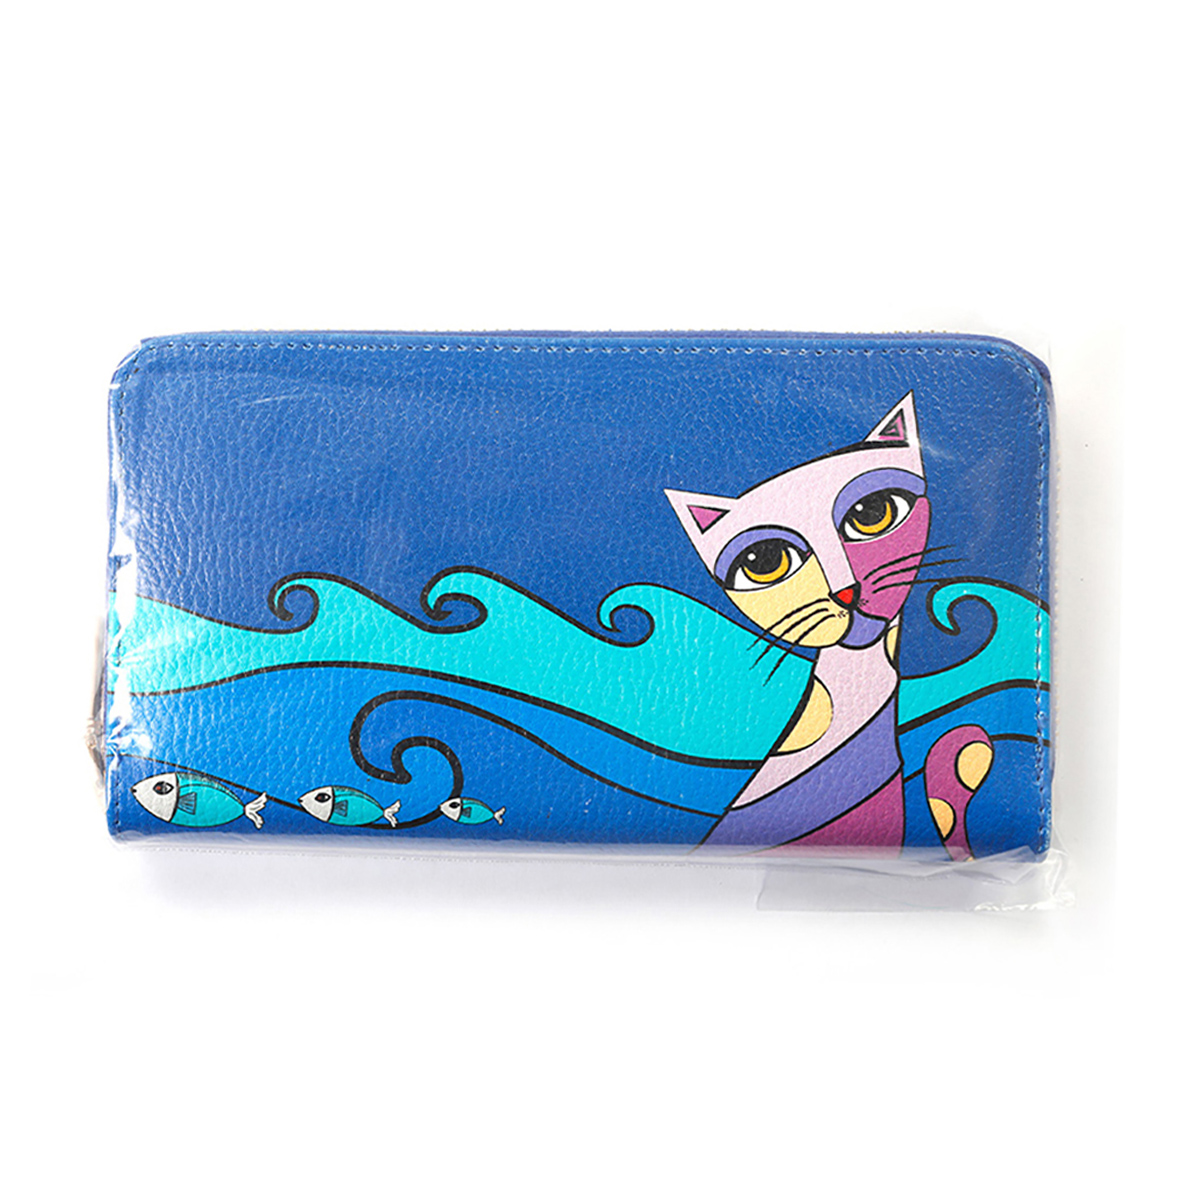 Women's Cat Wallet, Cute Cat Long Purse for Women, Card Holder for Girls, Women Wallet for Cash, Credit Cards, Phones and Coins (Faux Leather, Blue Color)